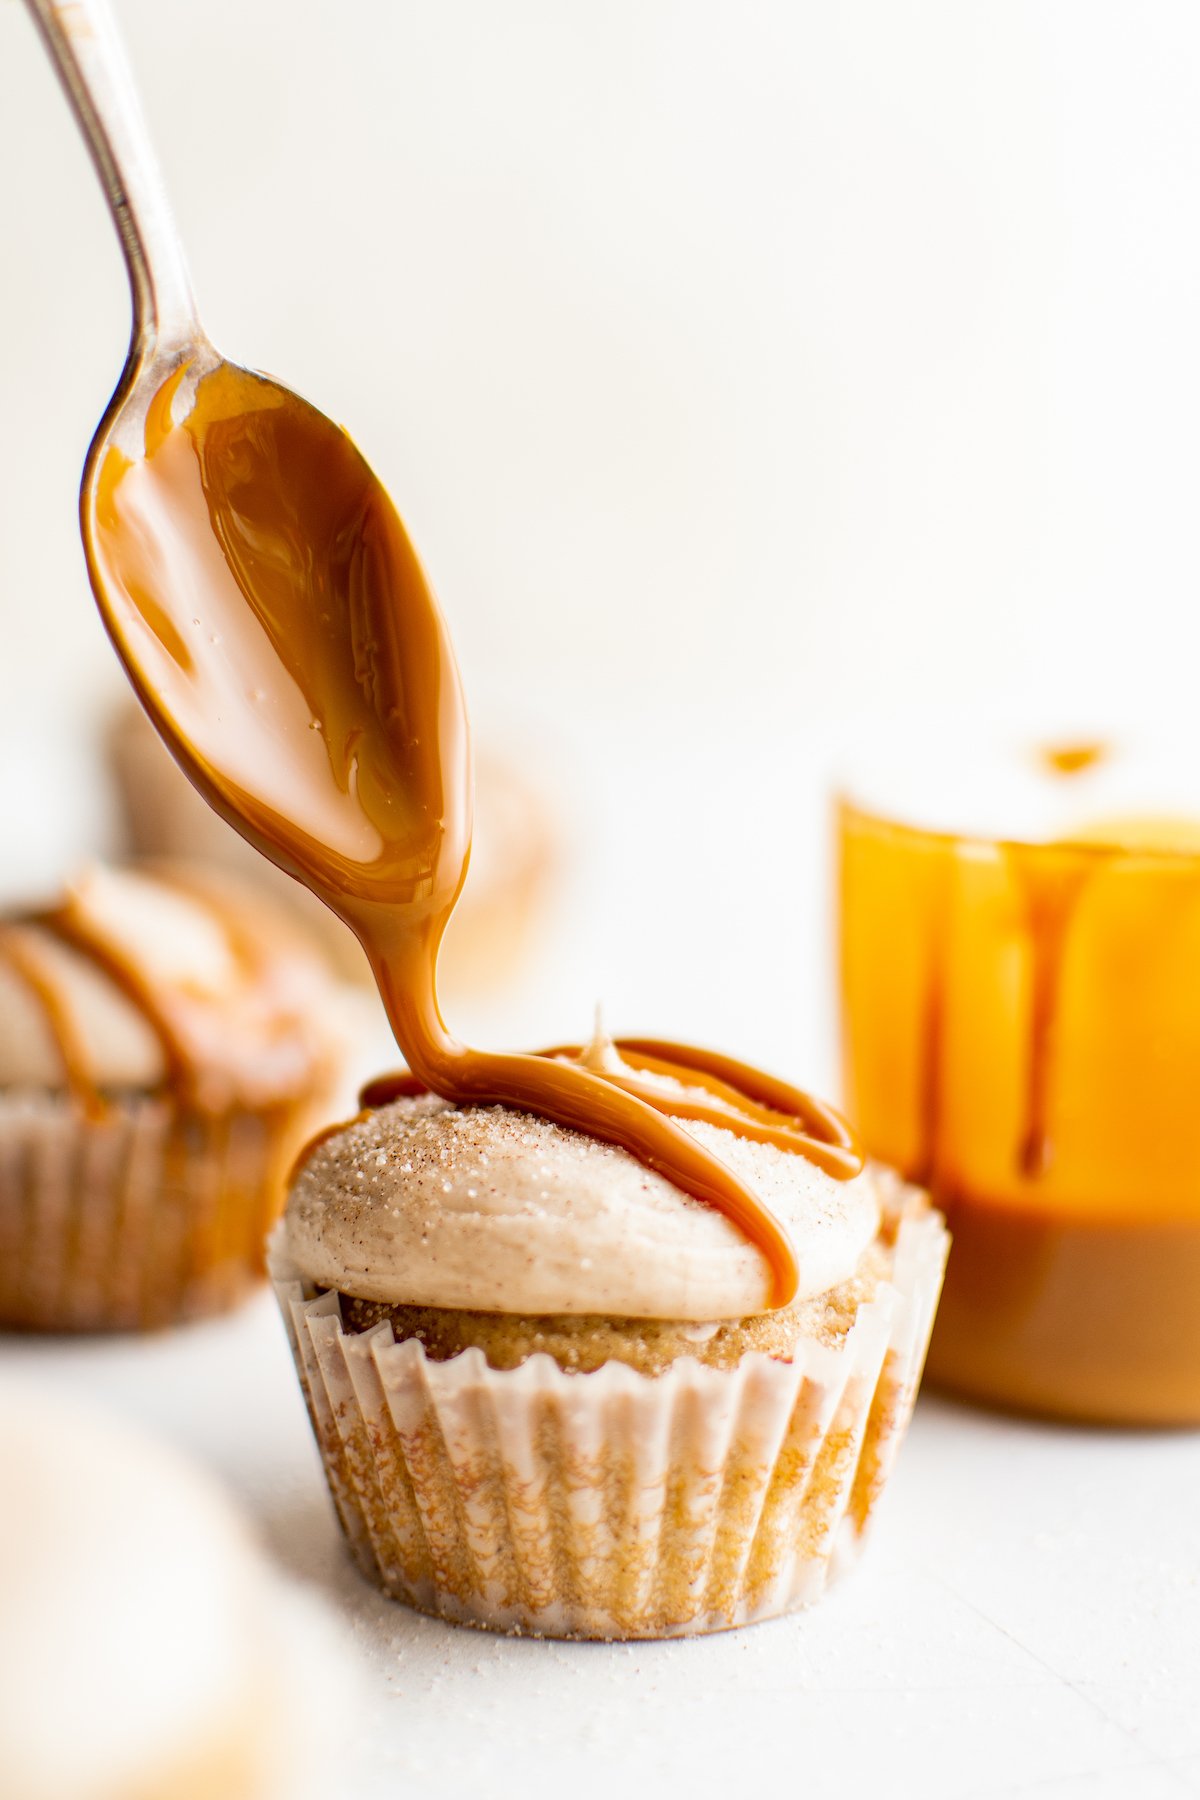 A churro cupcake next to a container of caramel sauce, with sauce being drizzled over the cupcake with a teaspoon.